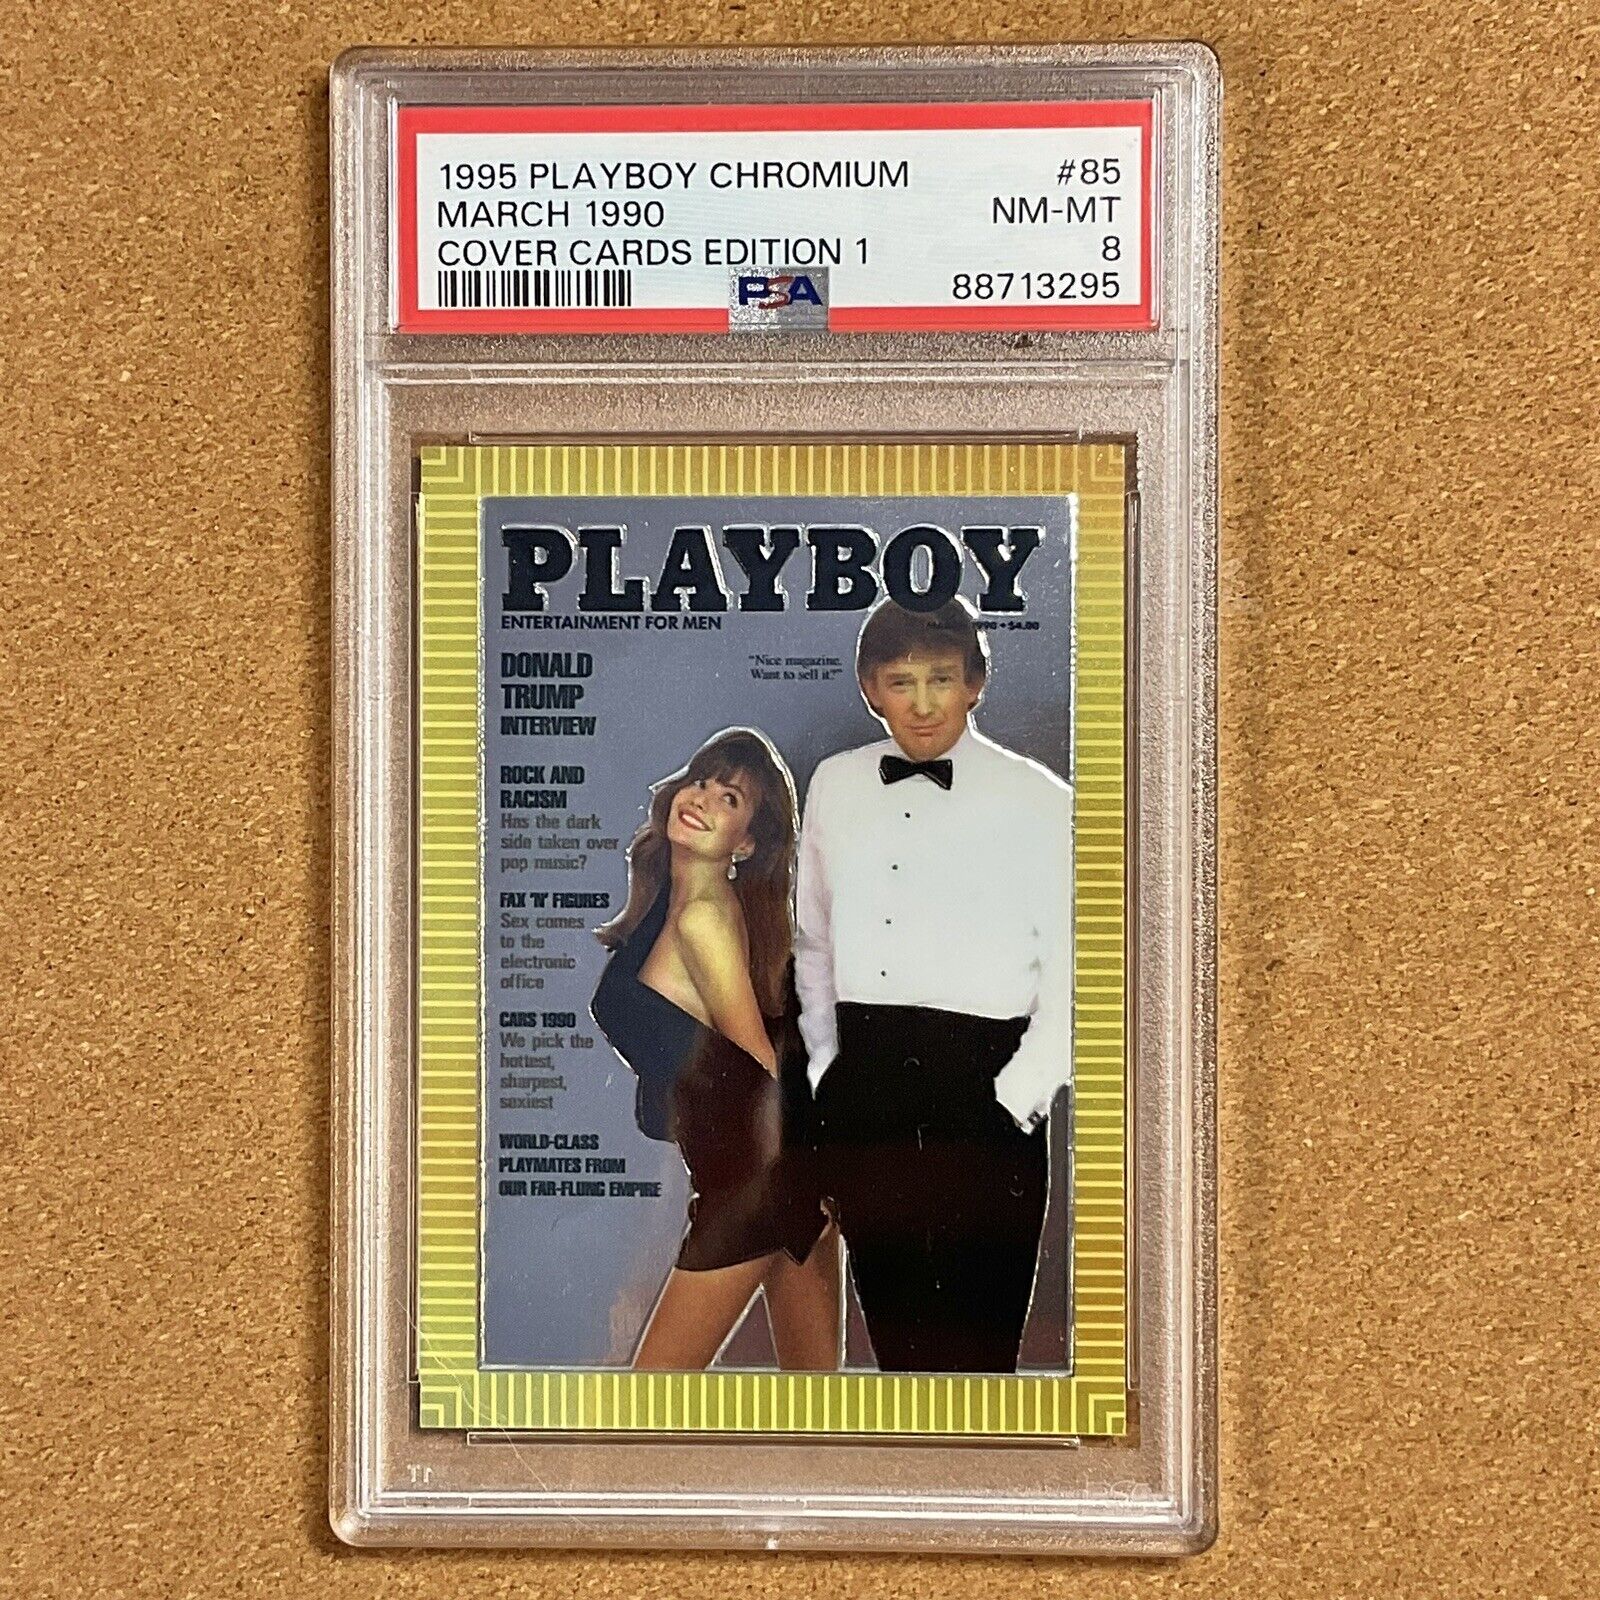 🔥 PLAYBOY 1995 CHROMIUM COVER CARD #85 EDITION 1 MARCH 1990 -  PSA 8 NM-MT